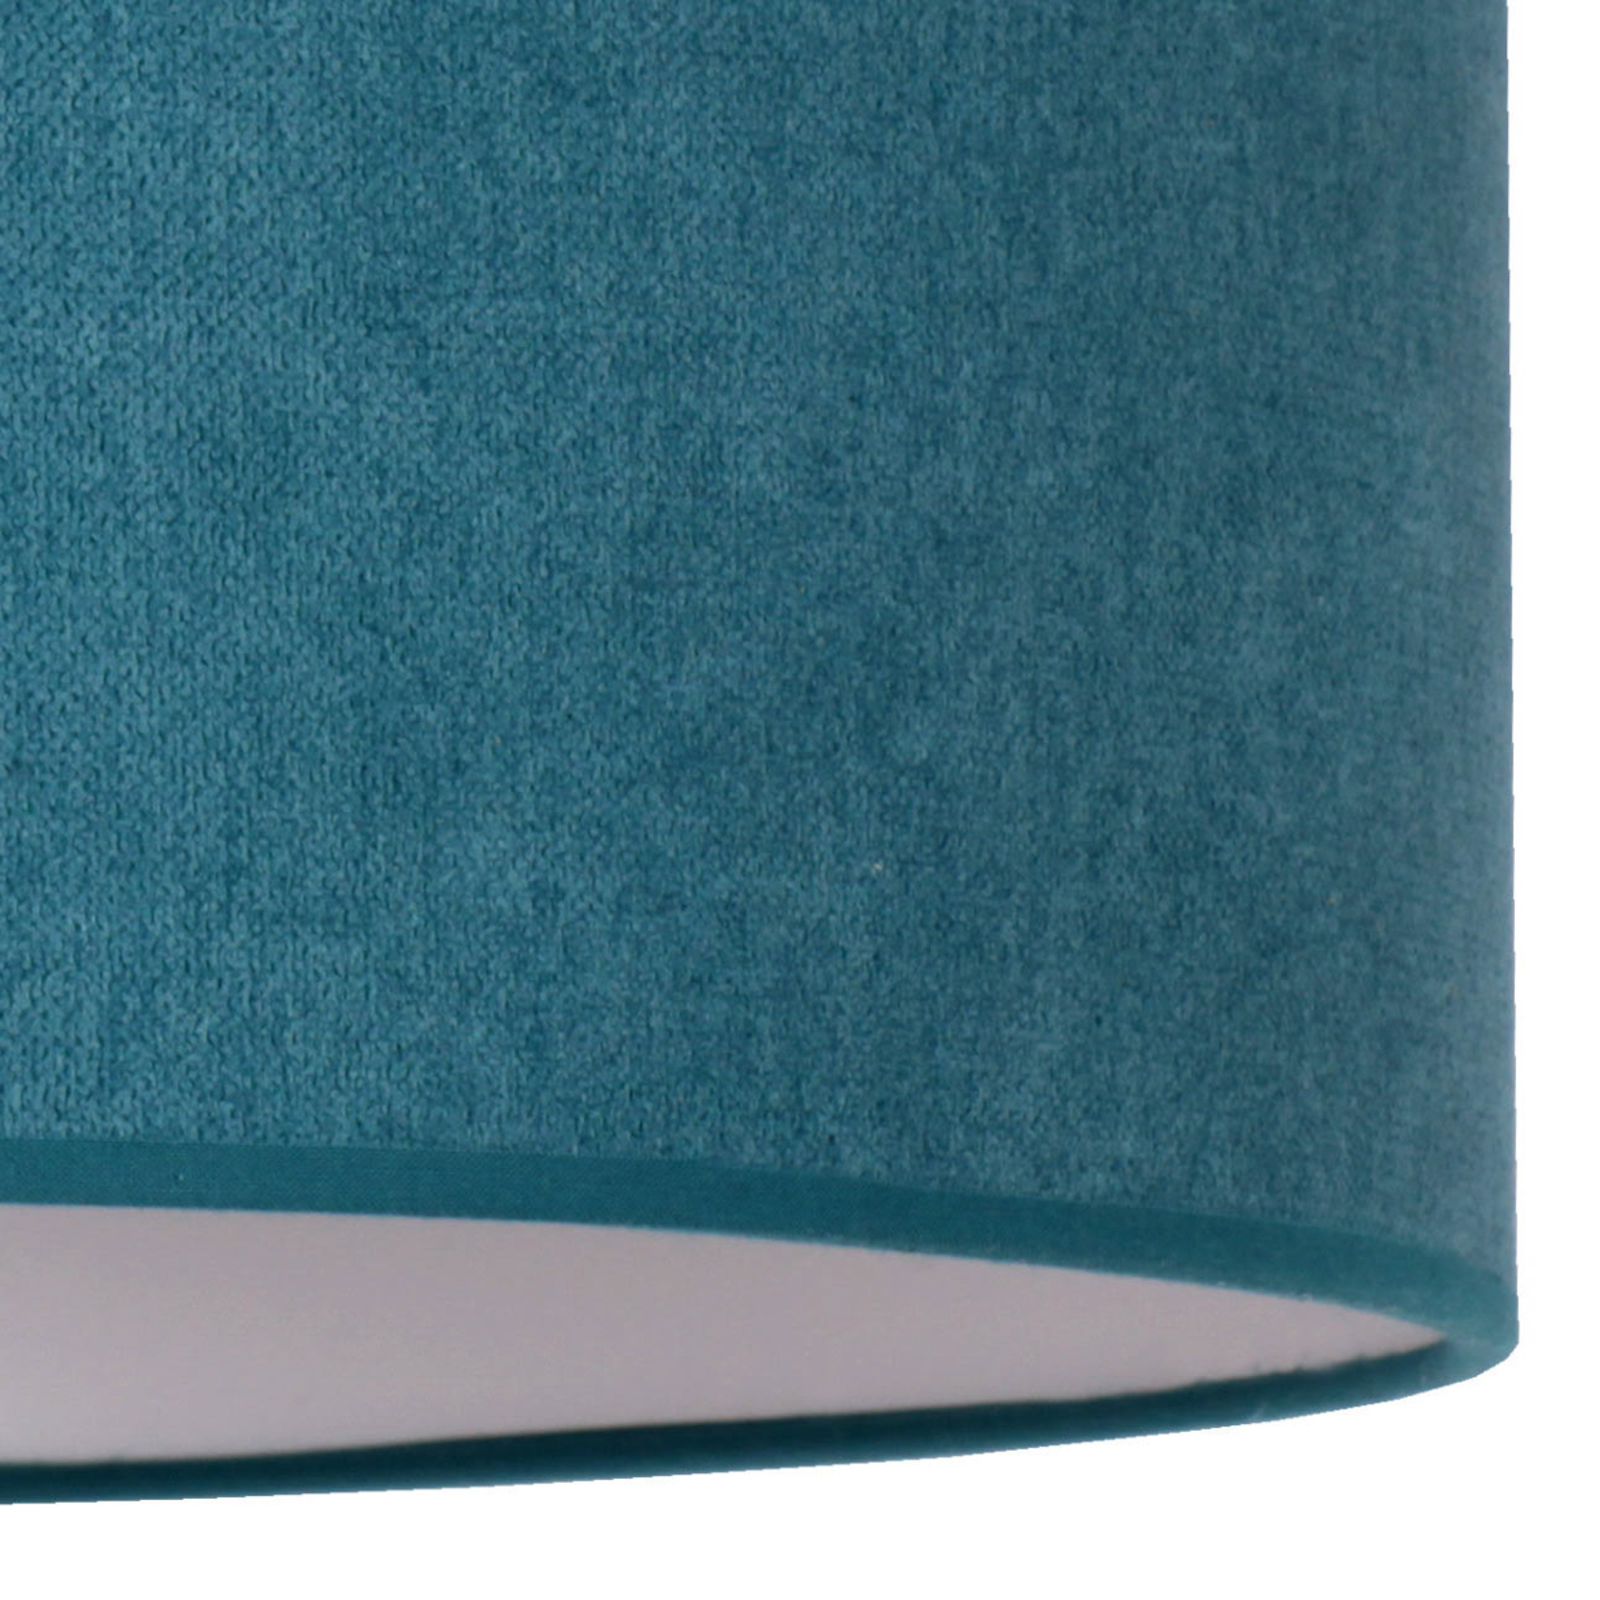 Pastell Roller ceiling lamp Ø 60 cm turquoise